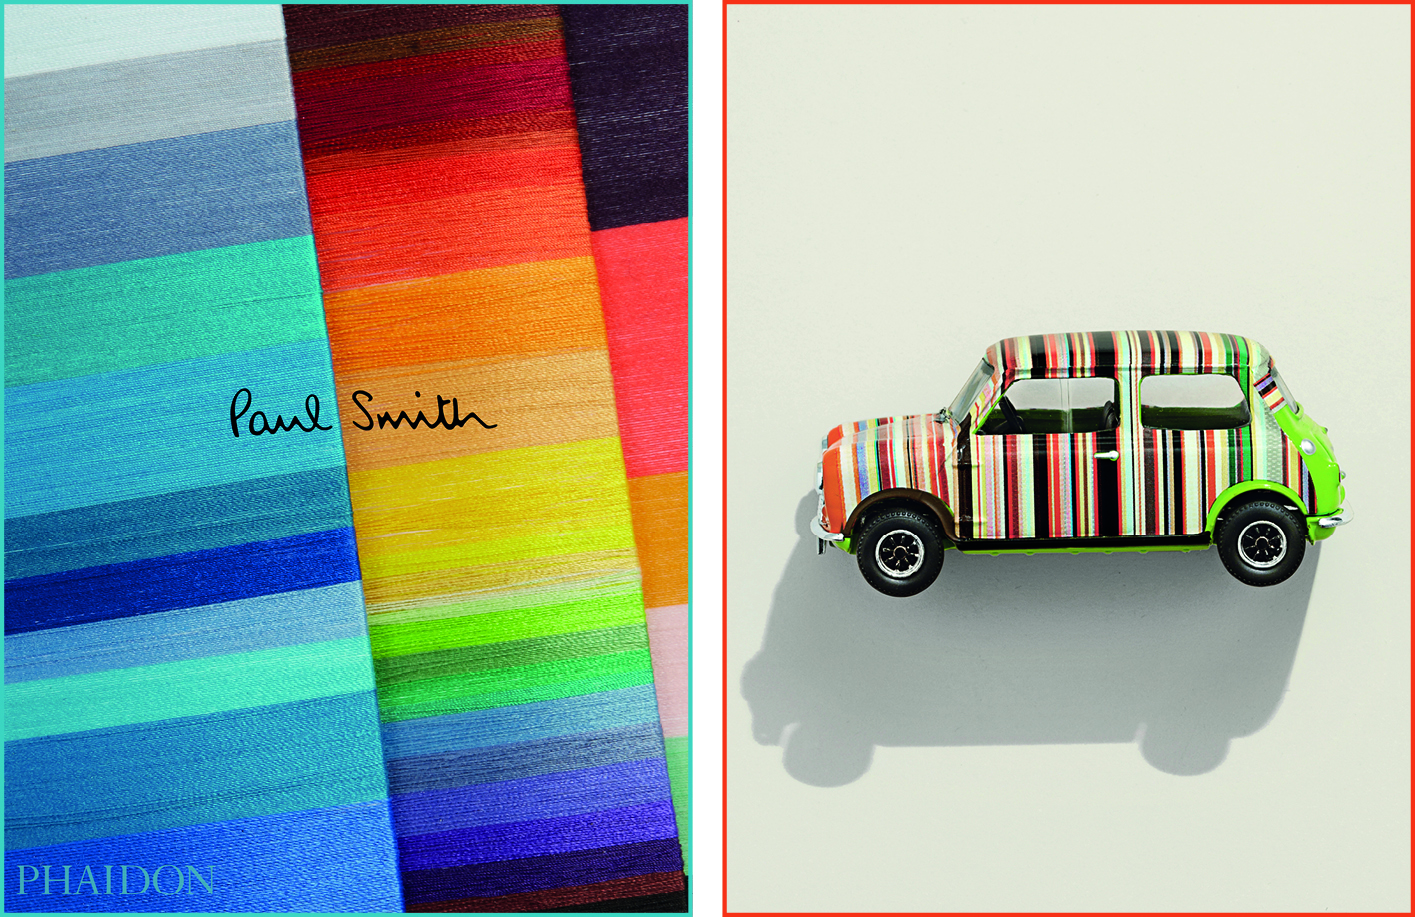 Paul Smith stripes have adorned clothing and cars